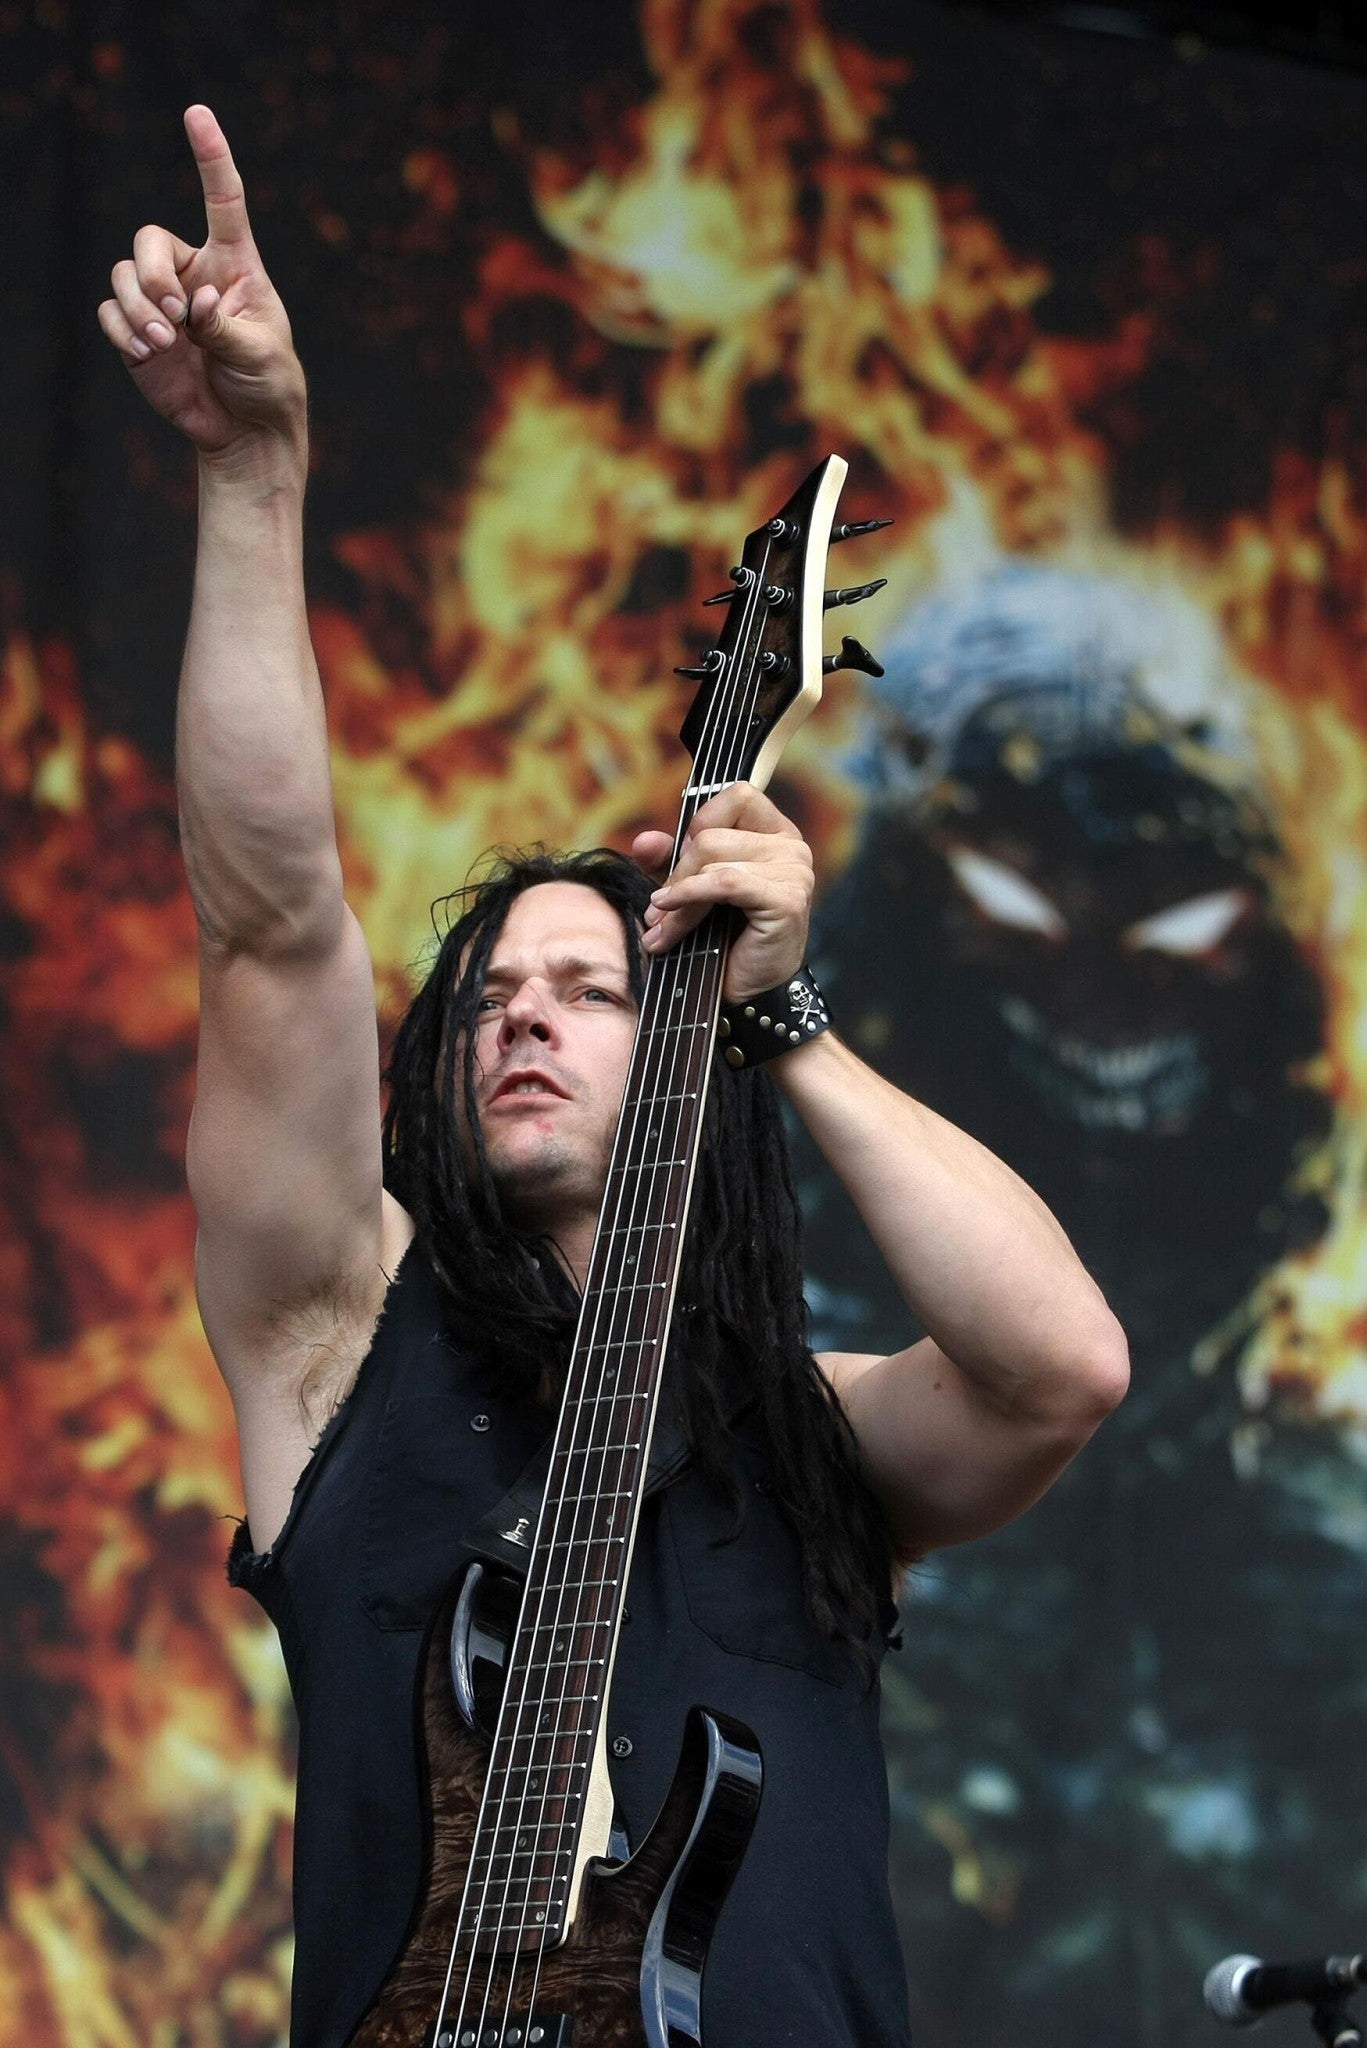 Disturbed - John Moyer on Stage with Banner Backdrop Live at the Rock am Ring Festival Germany 2008 Poster 2